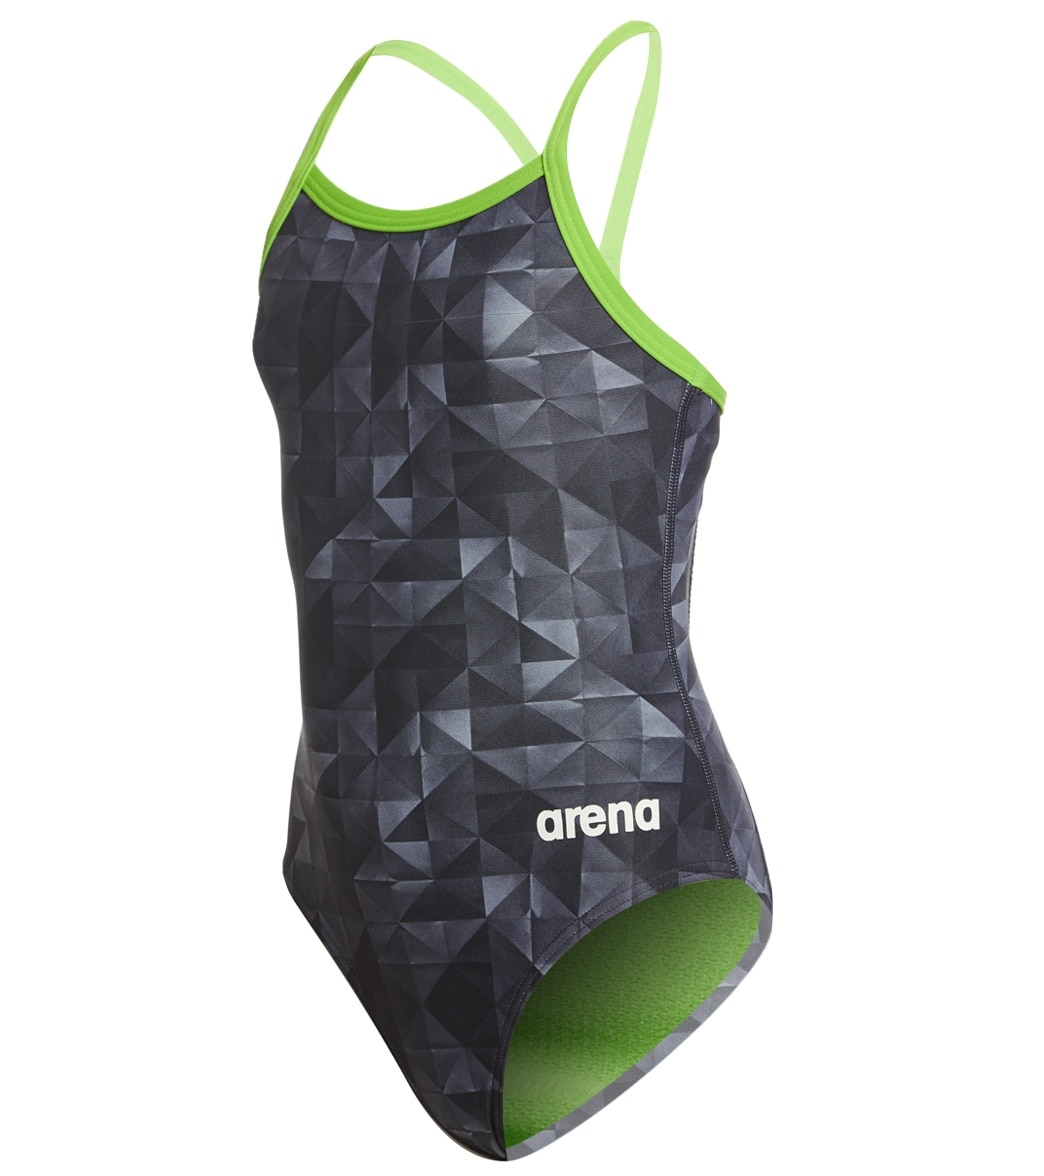 Arena Girls' Origami Maxlife Sporty Racer Back One Piece Swimsuit - Black/Leaf 22 Polyester/Pbt - Swimoutlet.com